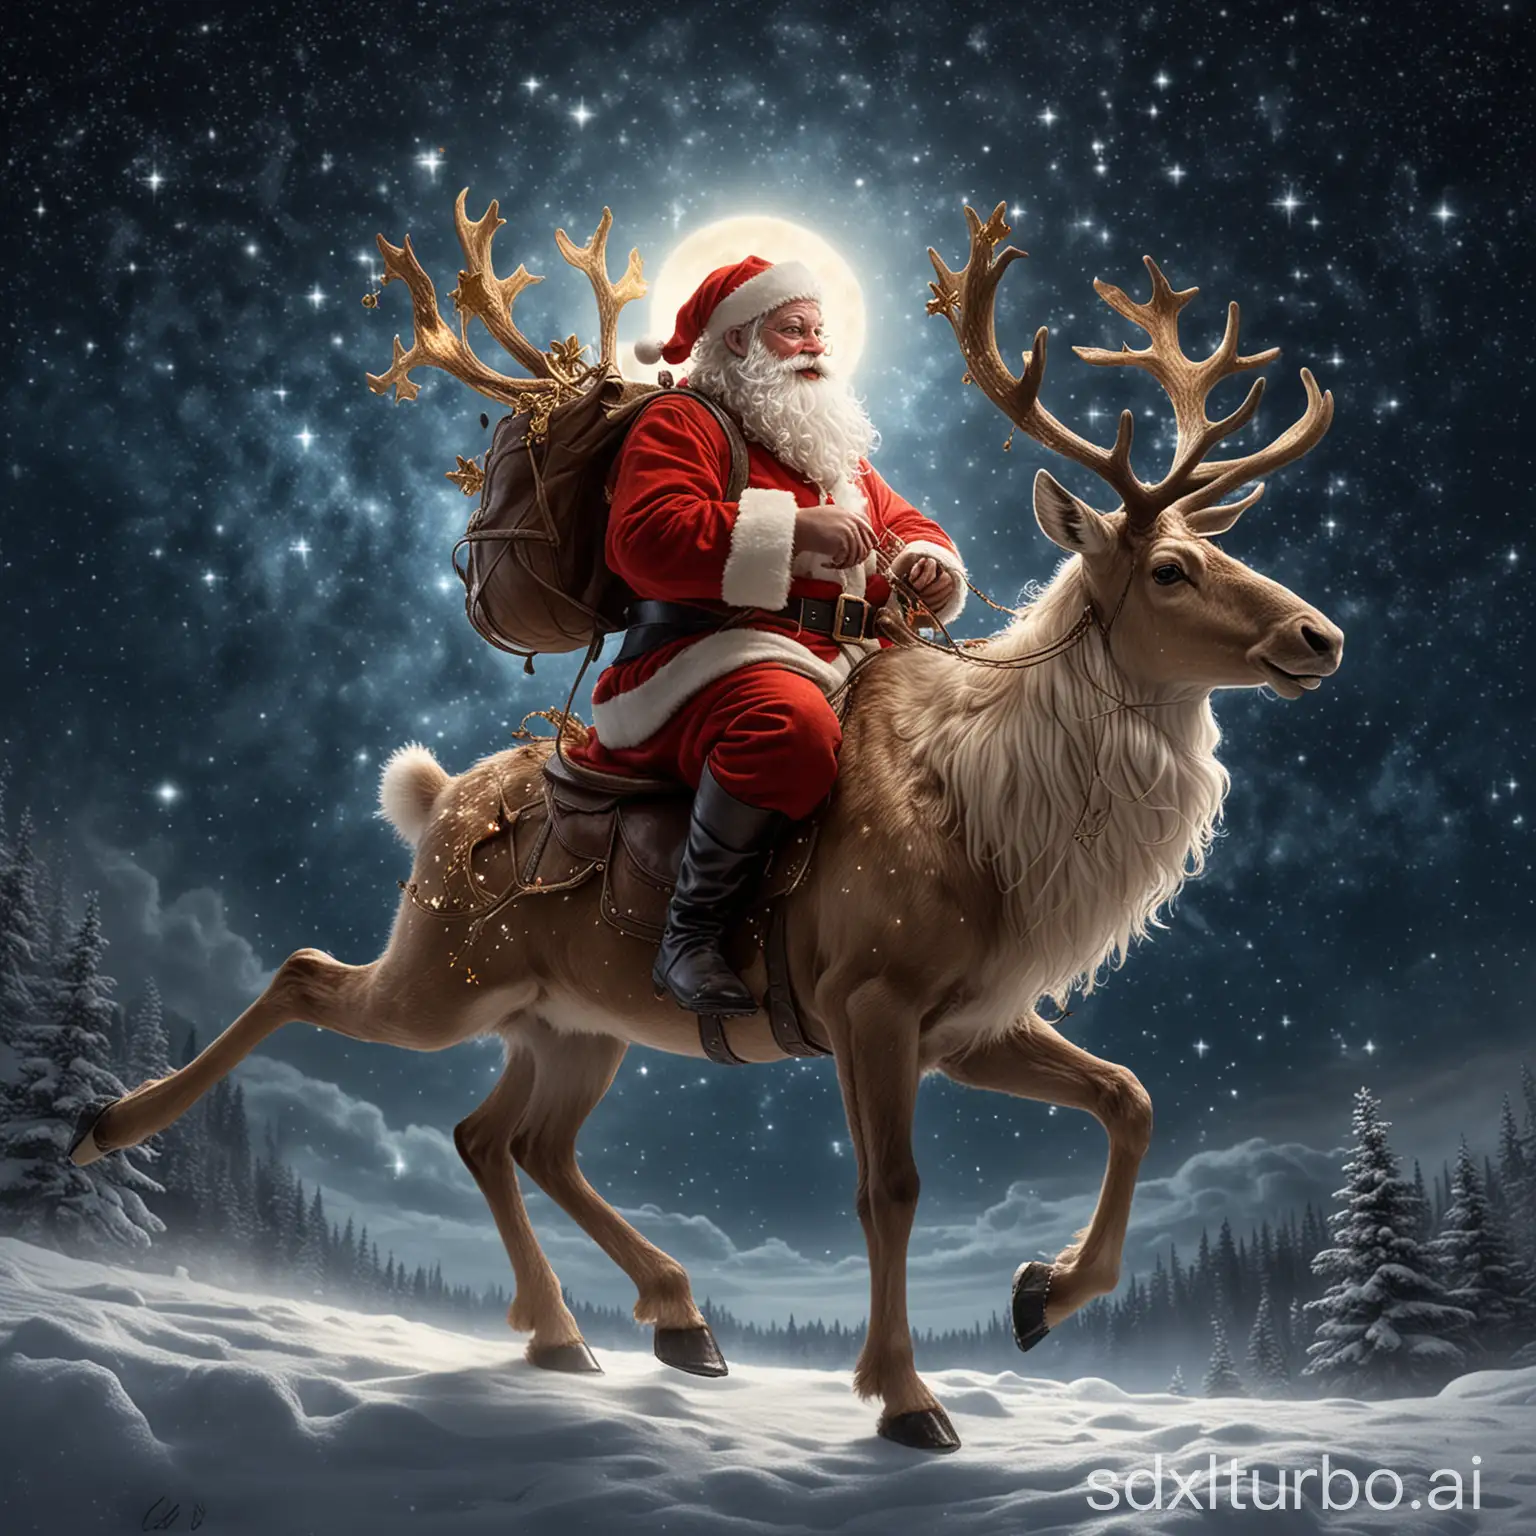 Santa-Claus-Riding-Shimmering-Reindeer-into-the-Night-Sky